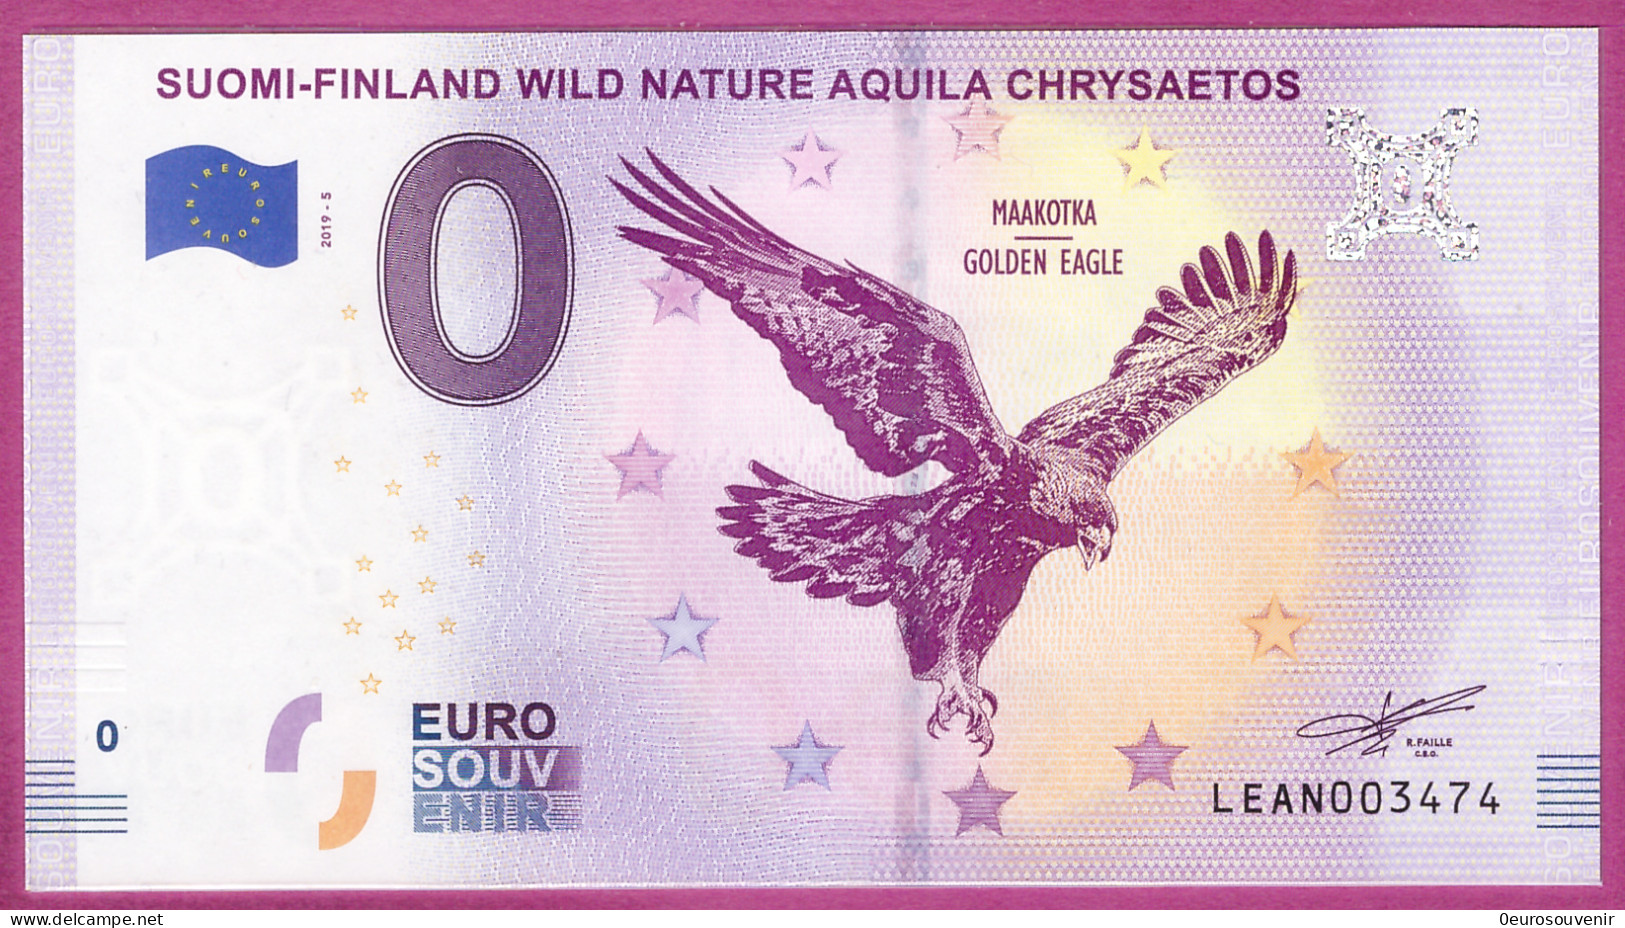 0-Euro LEAN 2019-5 SUOMI - FINLAND WILD NATURE AQUILA CHRYSAETOS - STEINADLER - Private Proofs / Unofficial